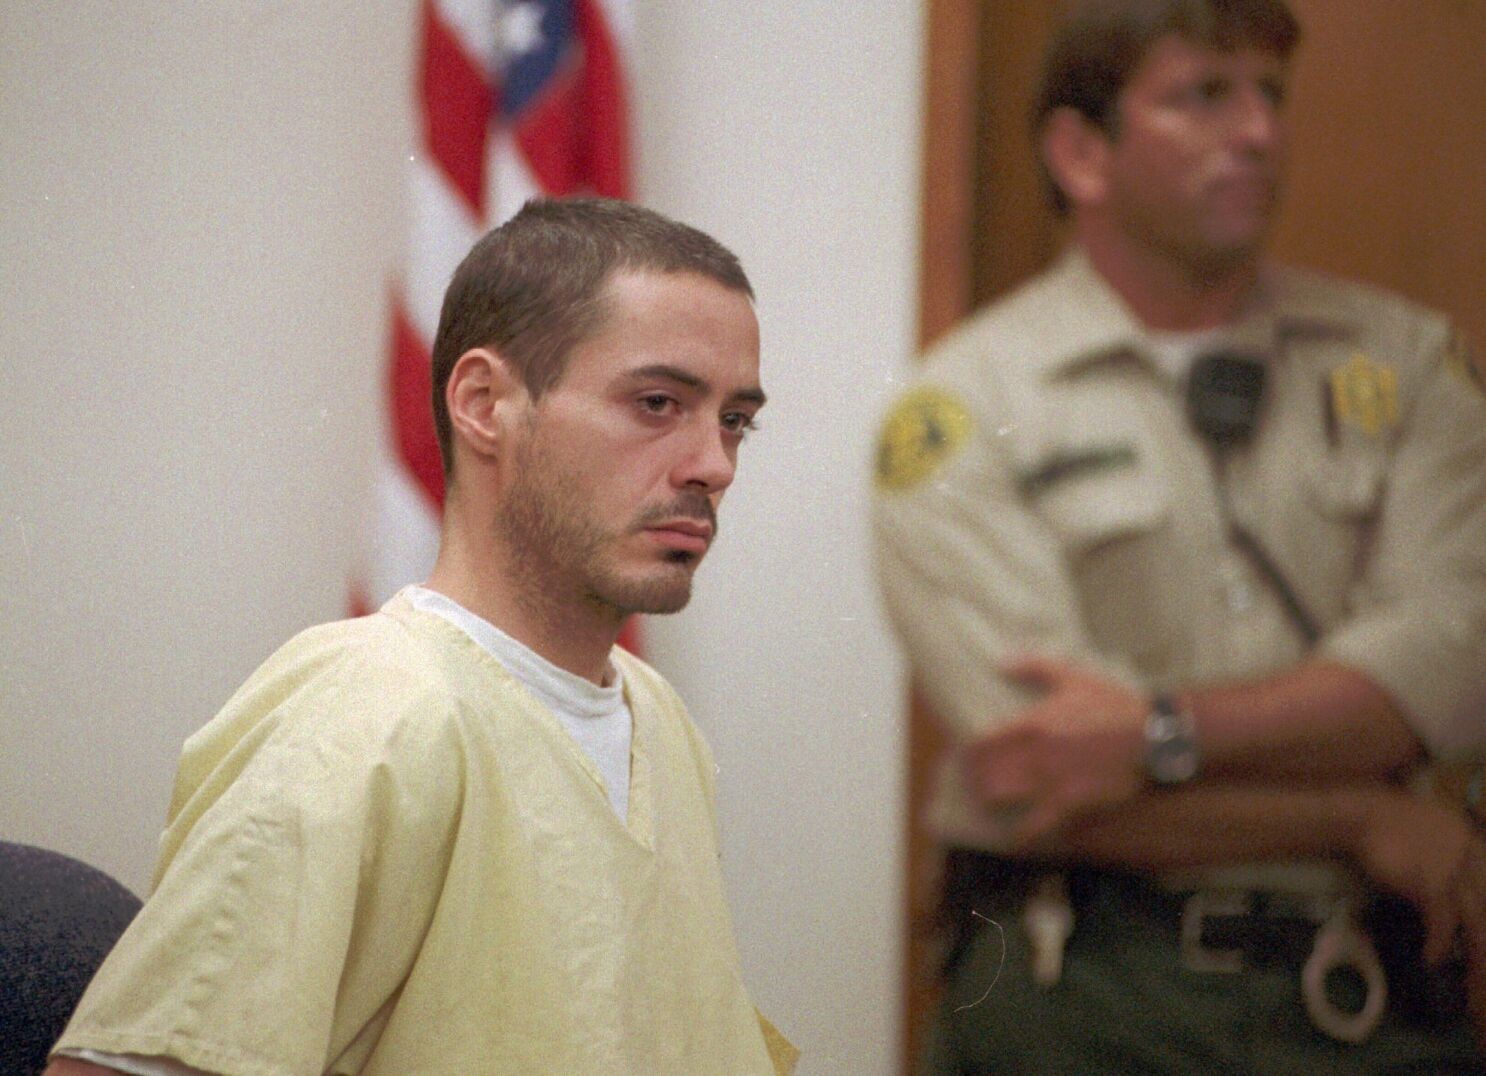 Robert Downey Jr. while facing a trial.